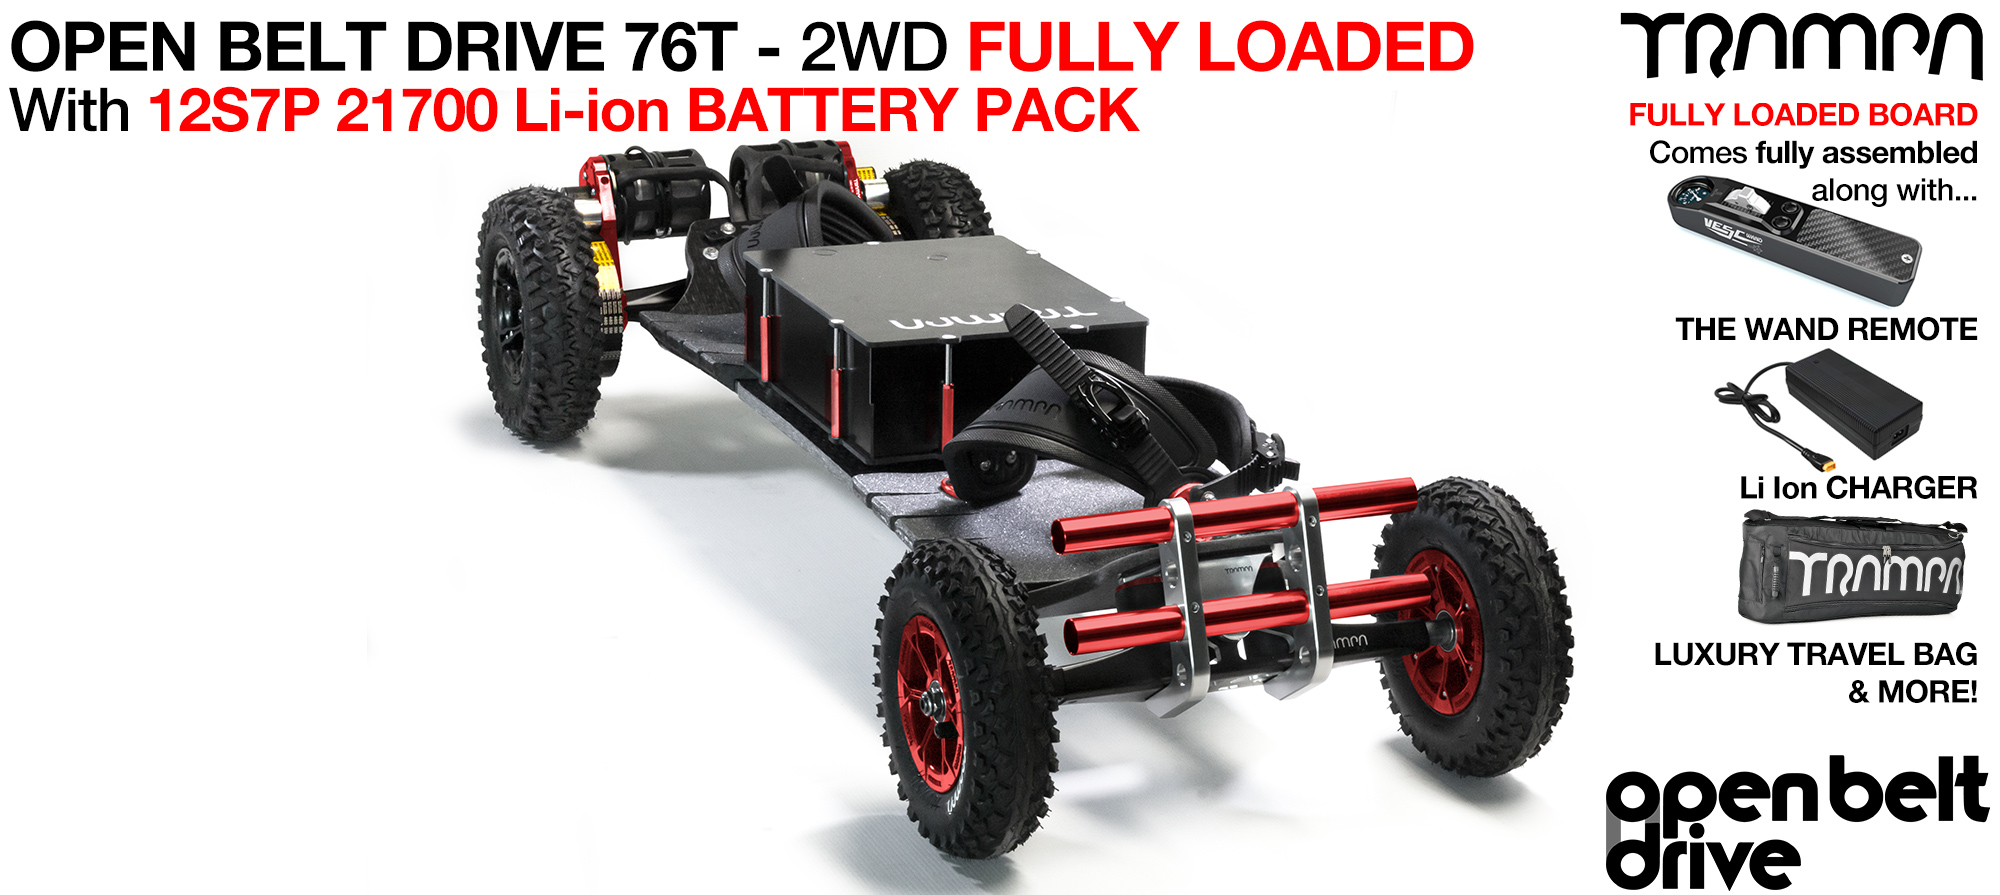 2WD 66T Open Belt Drive TRAMPA Electric Mountainboard Fits up to 9Inch Wheels using 76 Tooth Pulleys - LOADED 21700 Cell Pack